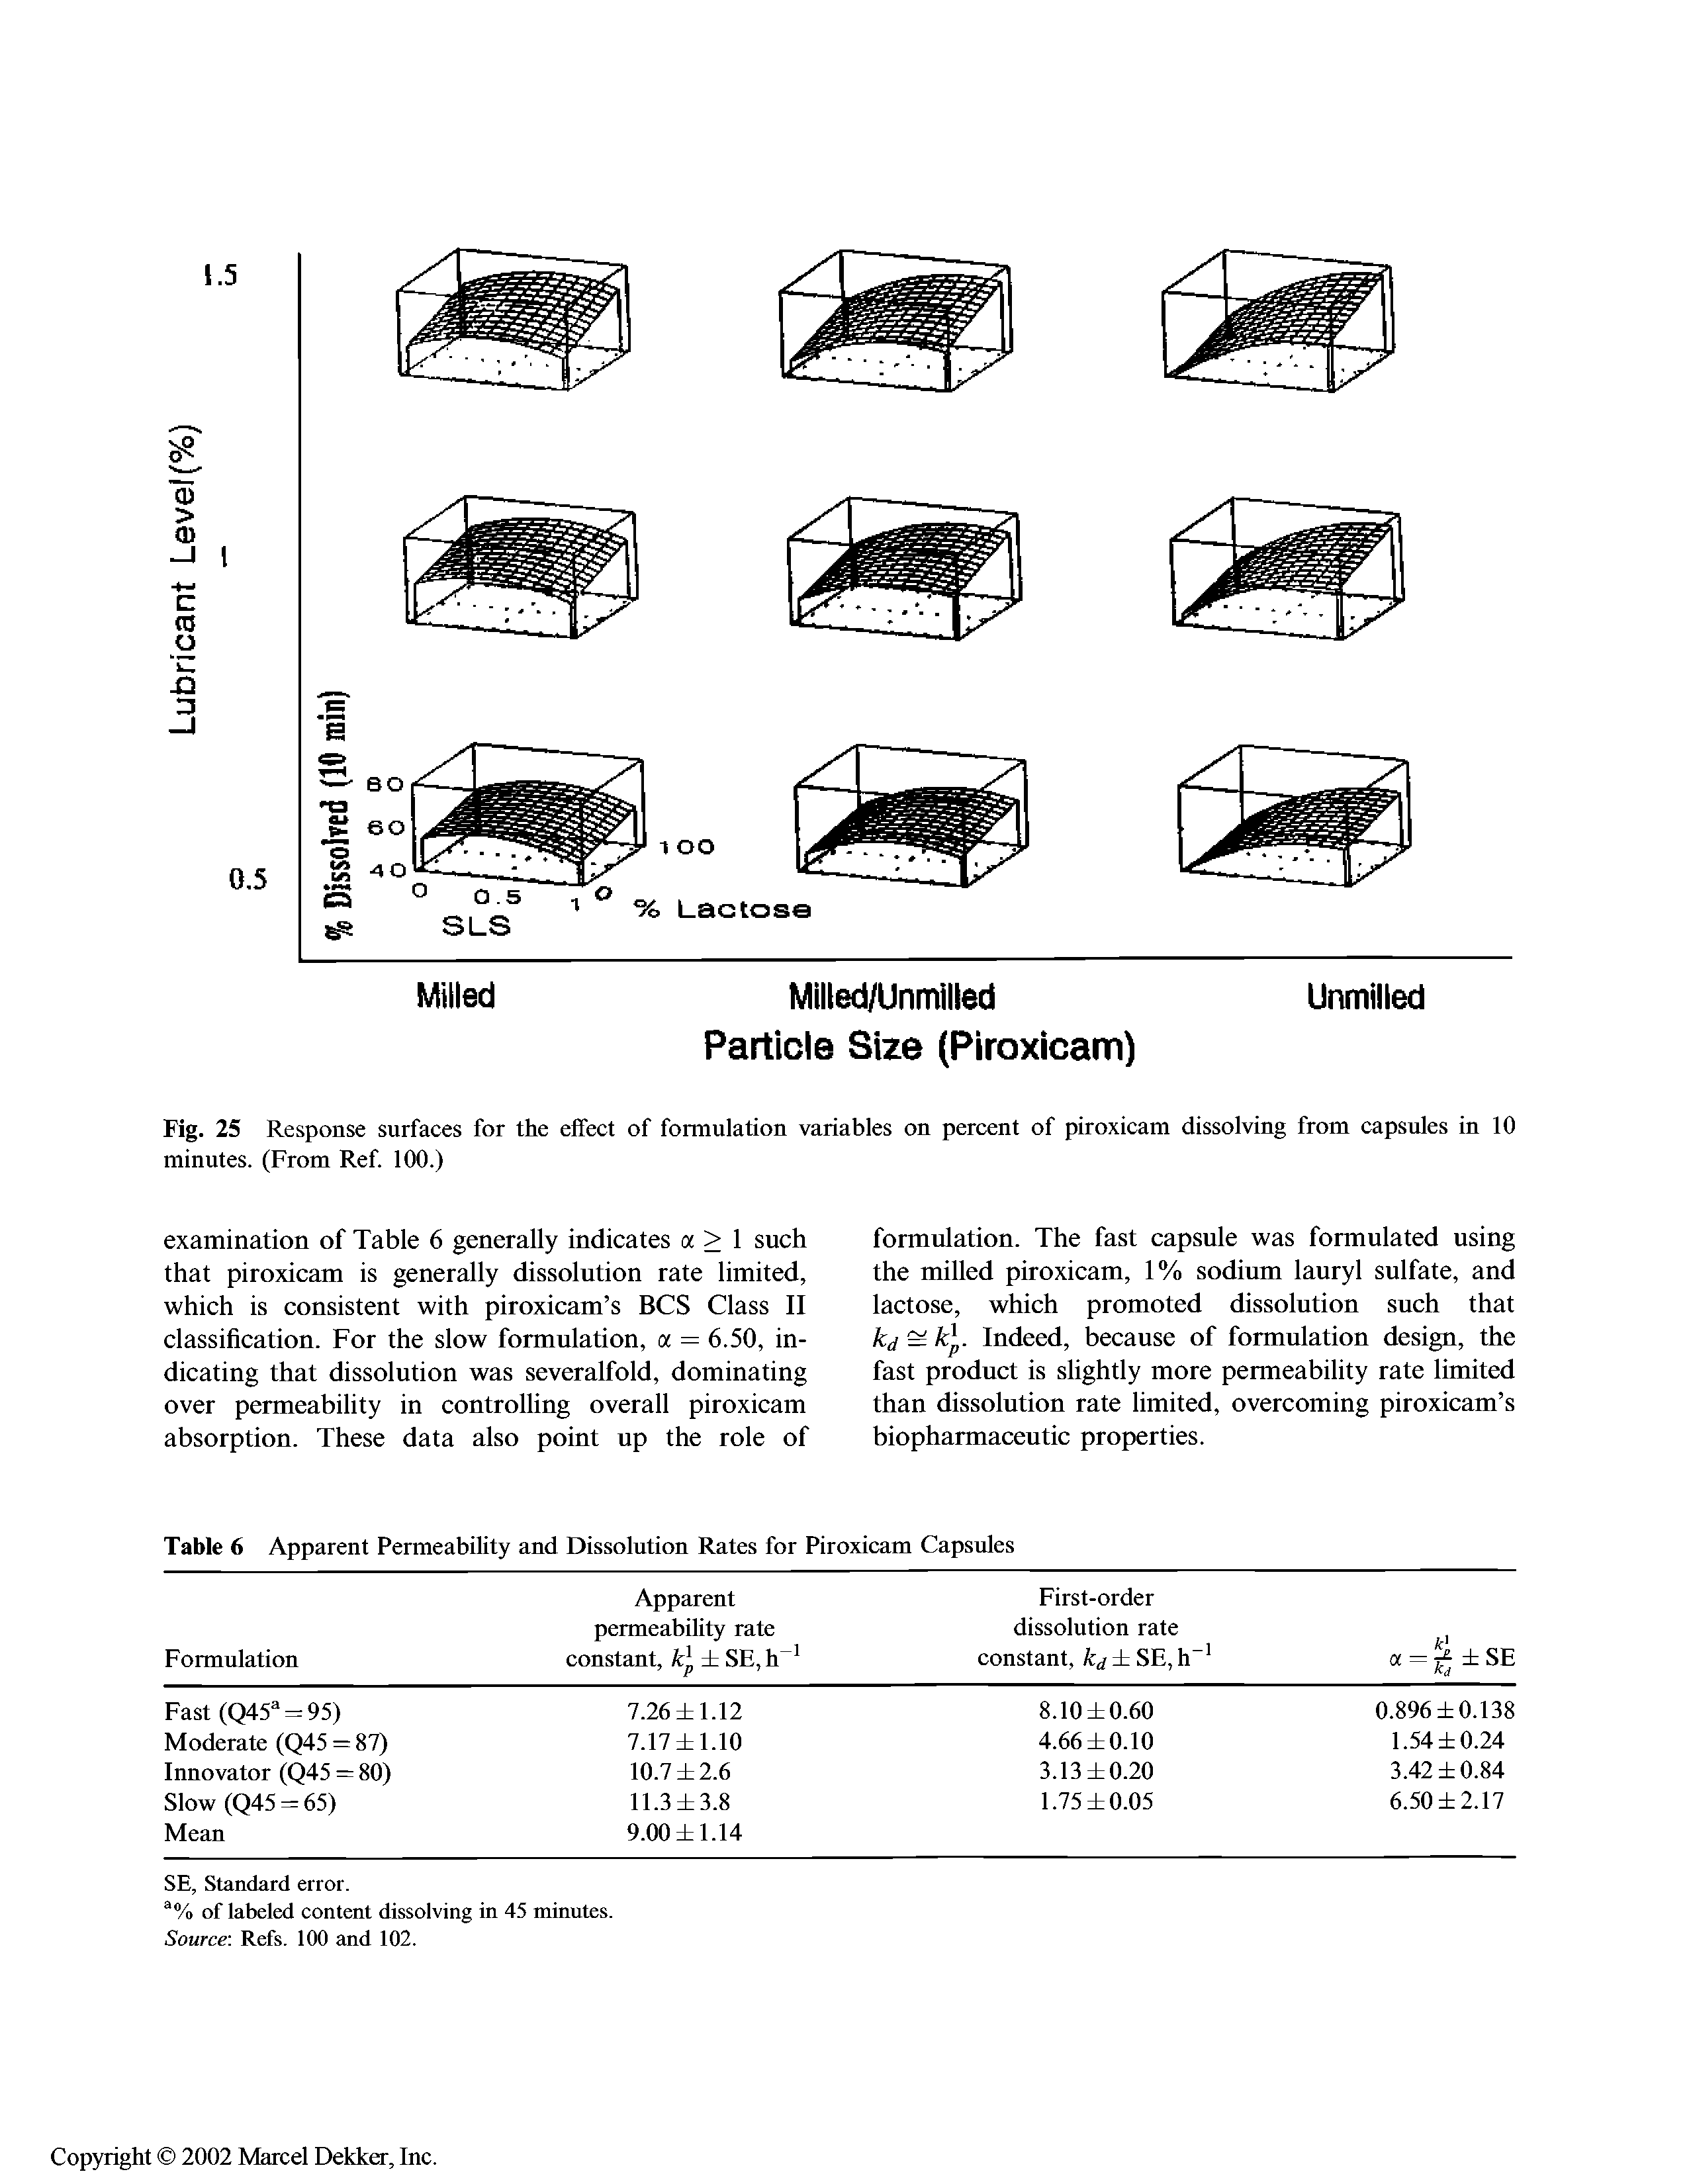 Fig. 25 Response surfaces for the effect of formulation variables on percent of piroxicam dissolving from capsules in 10 minutes. (From Ref. 100.)...